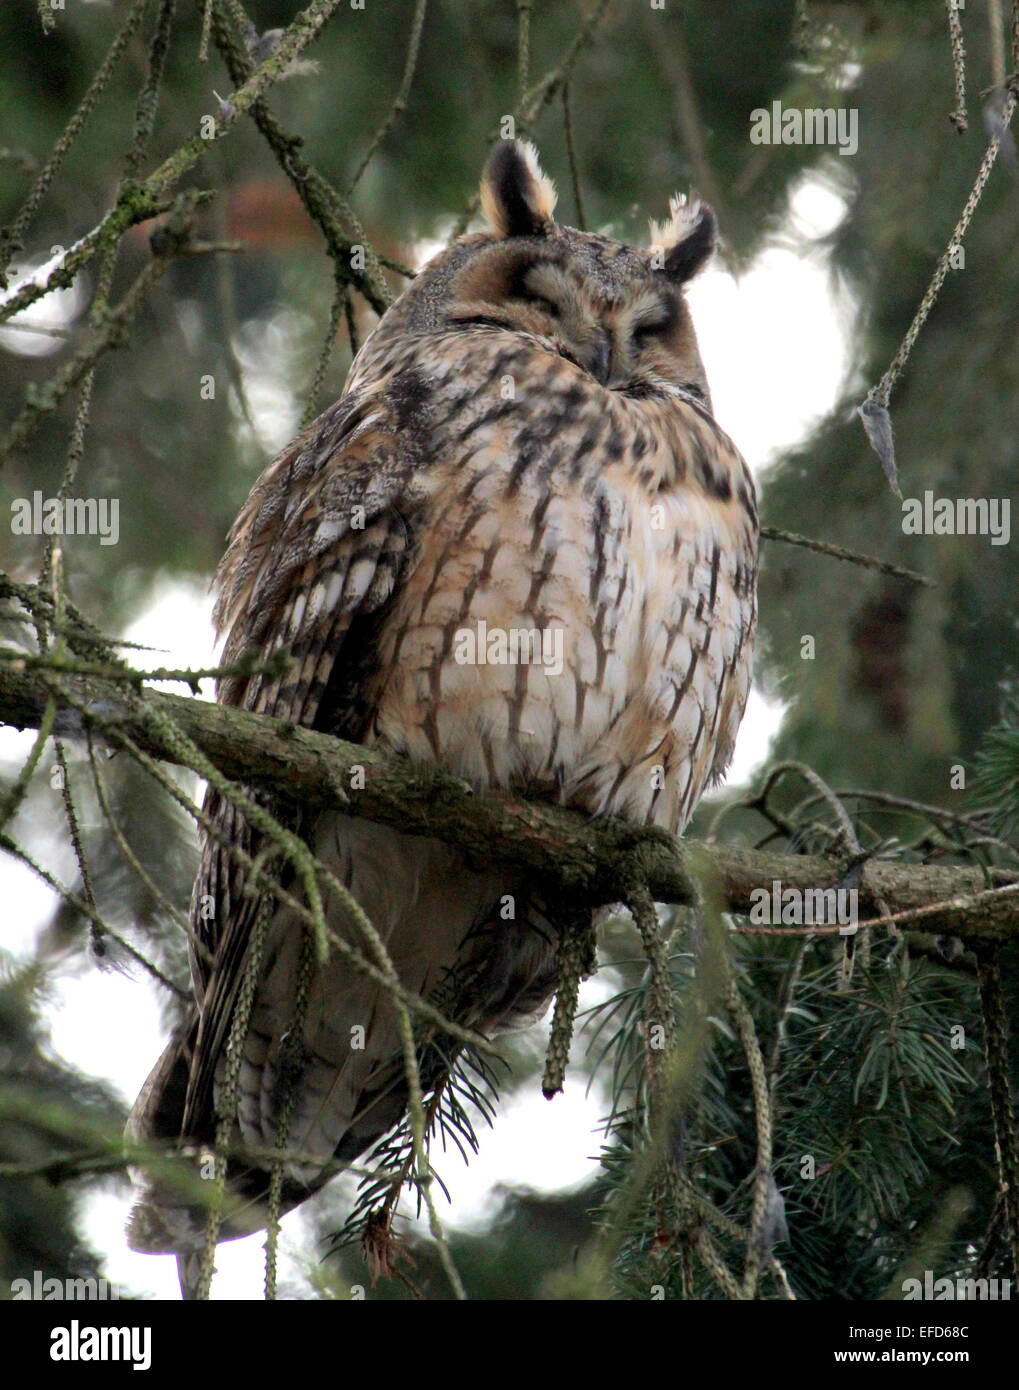 Long-eared Owl (Asio otus) in a pine tree during daytime, dozing and resting. Stock Photo